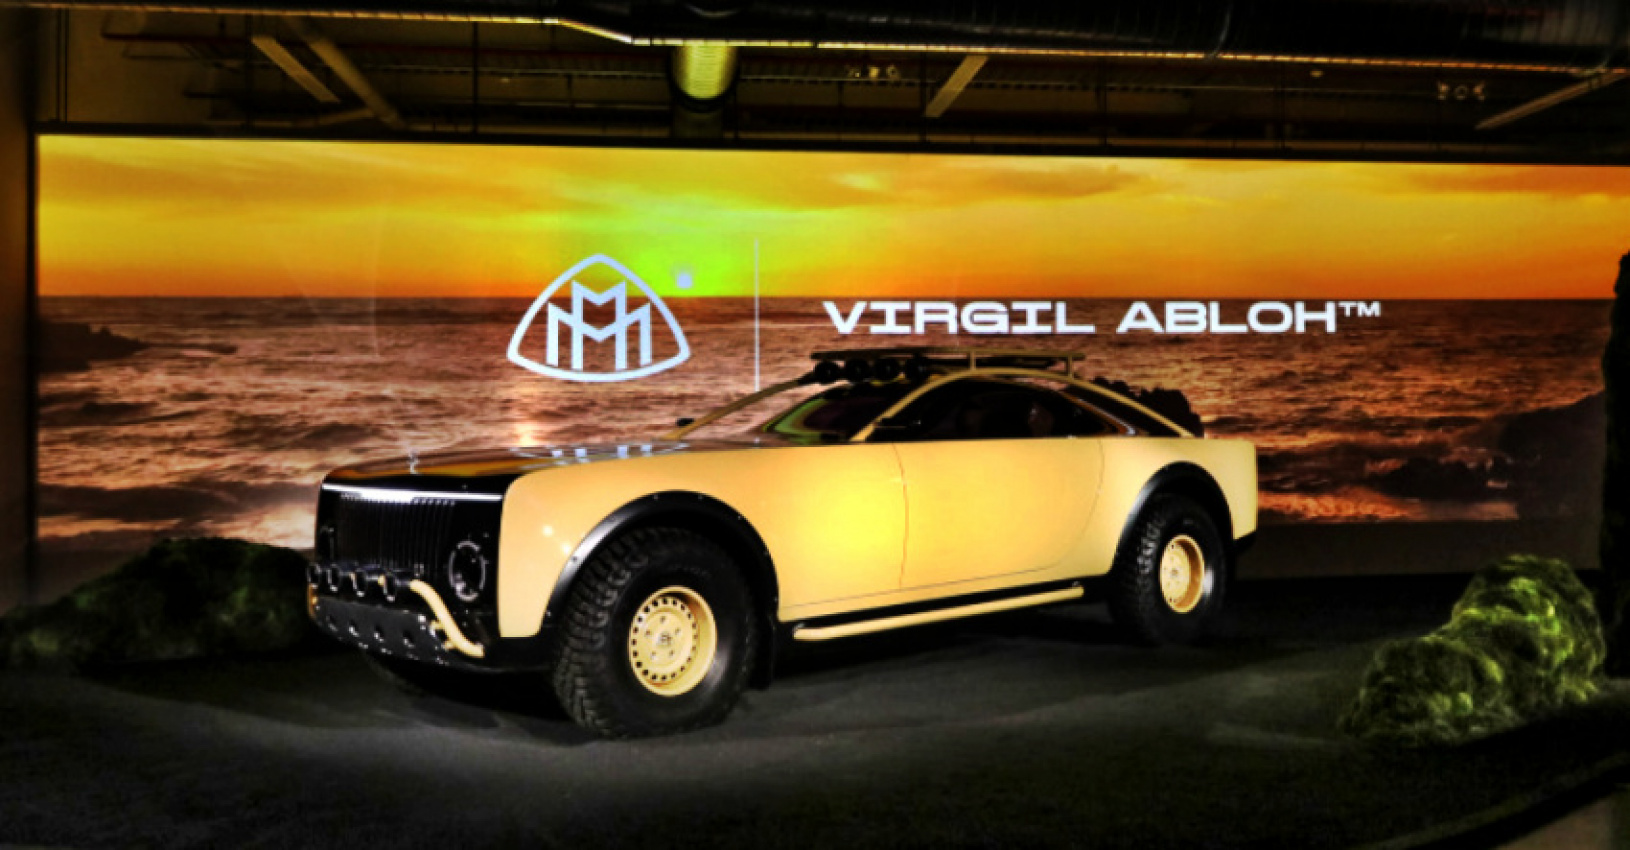 autos, cars, maybach, concept car, electric vehicle, gordon wagener, mercedes-benz, mercedes-maybach, project maybach, zero emissions, project maybach – a tribute to the late virgil abloh